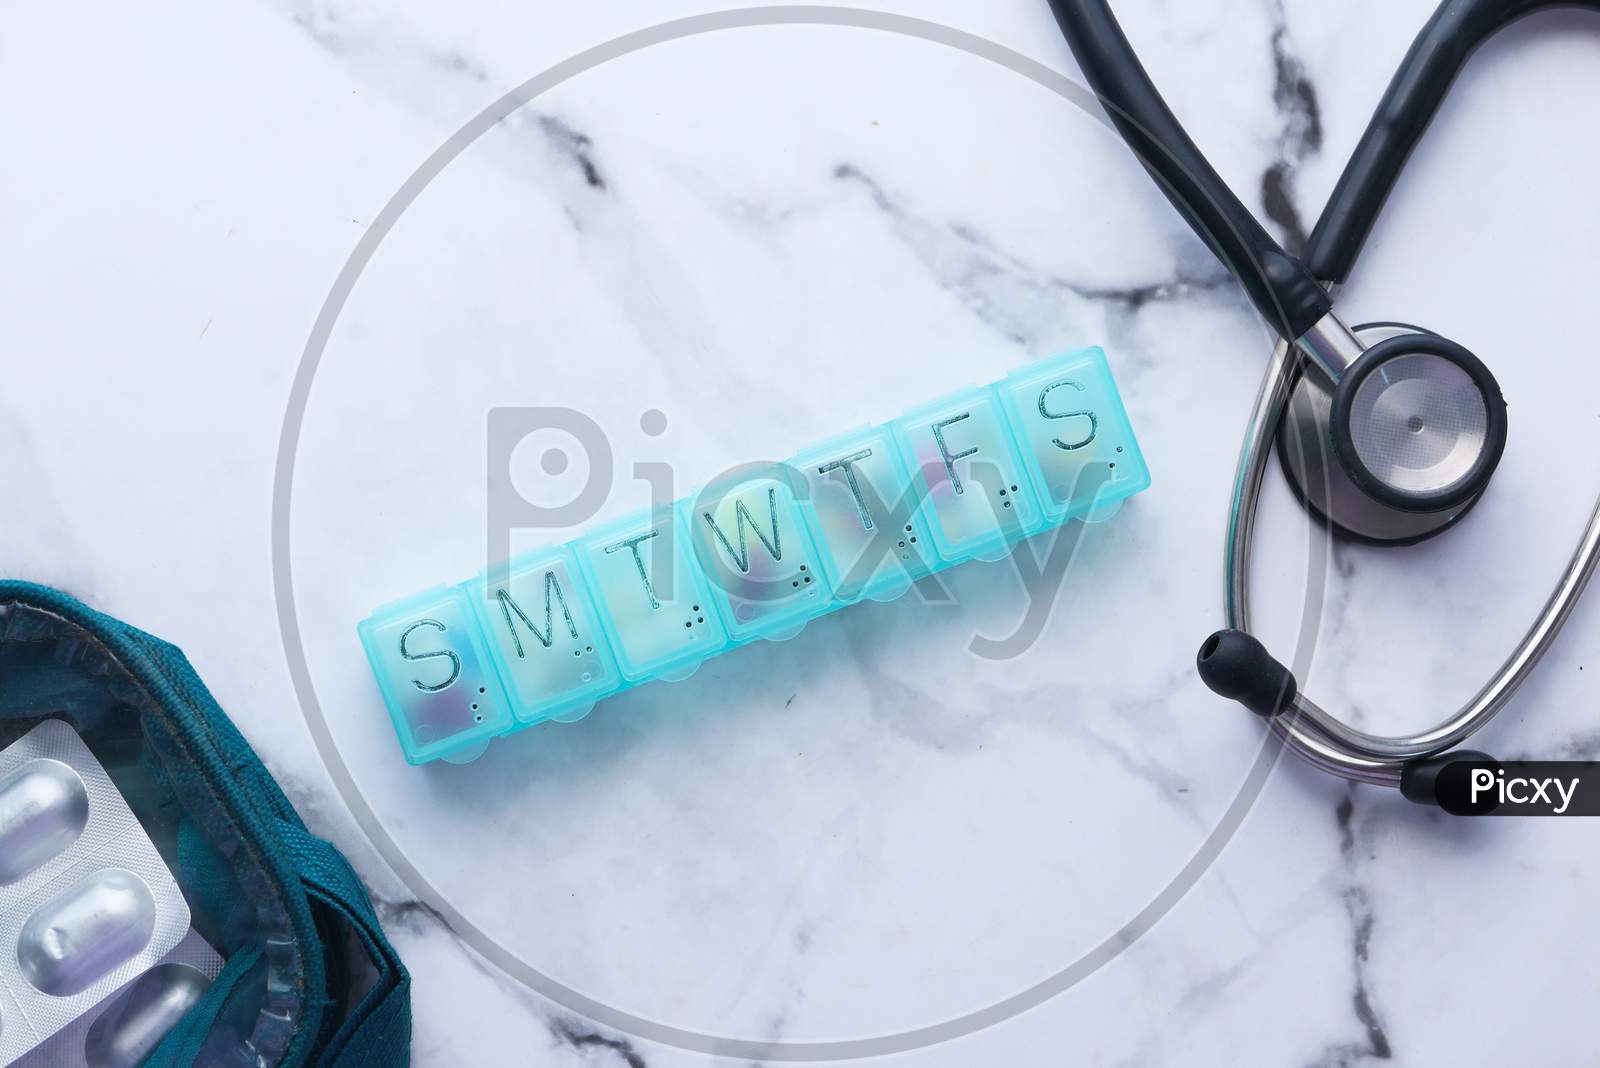 Top View Of Pill Box And Stethoscope On White Background